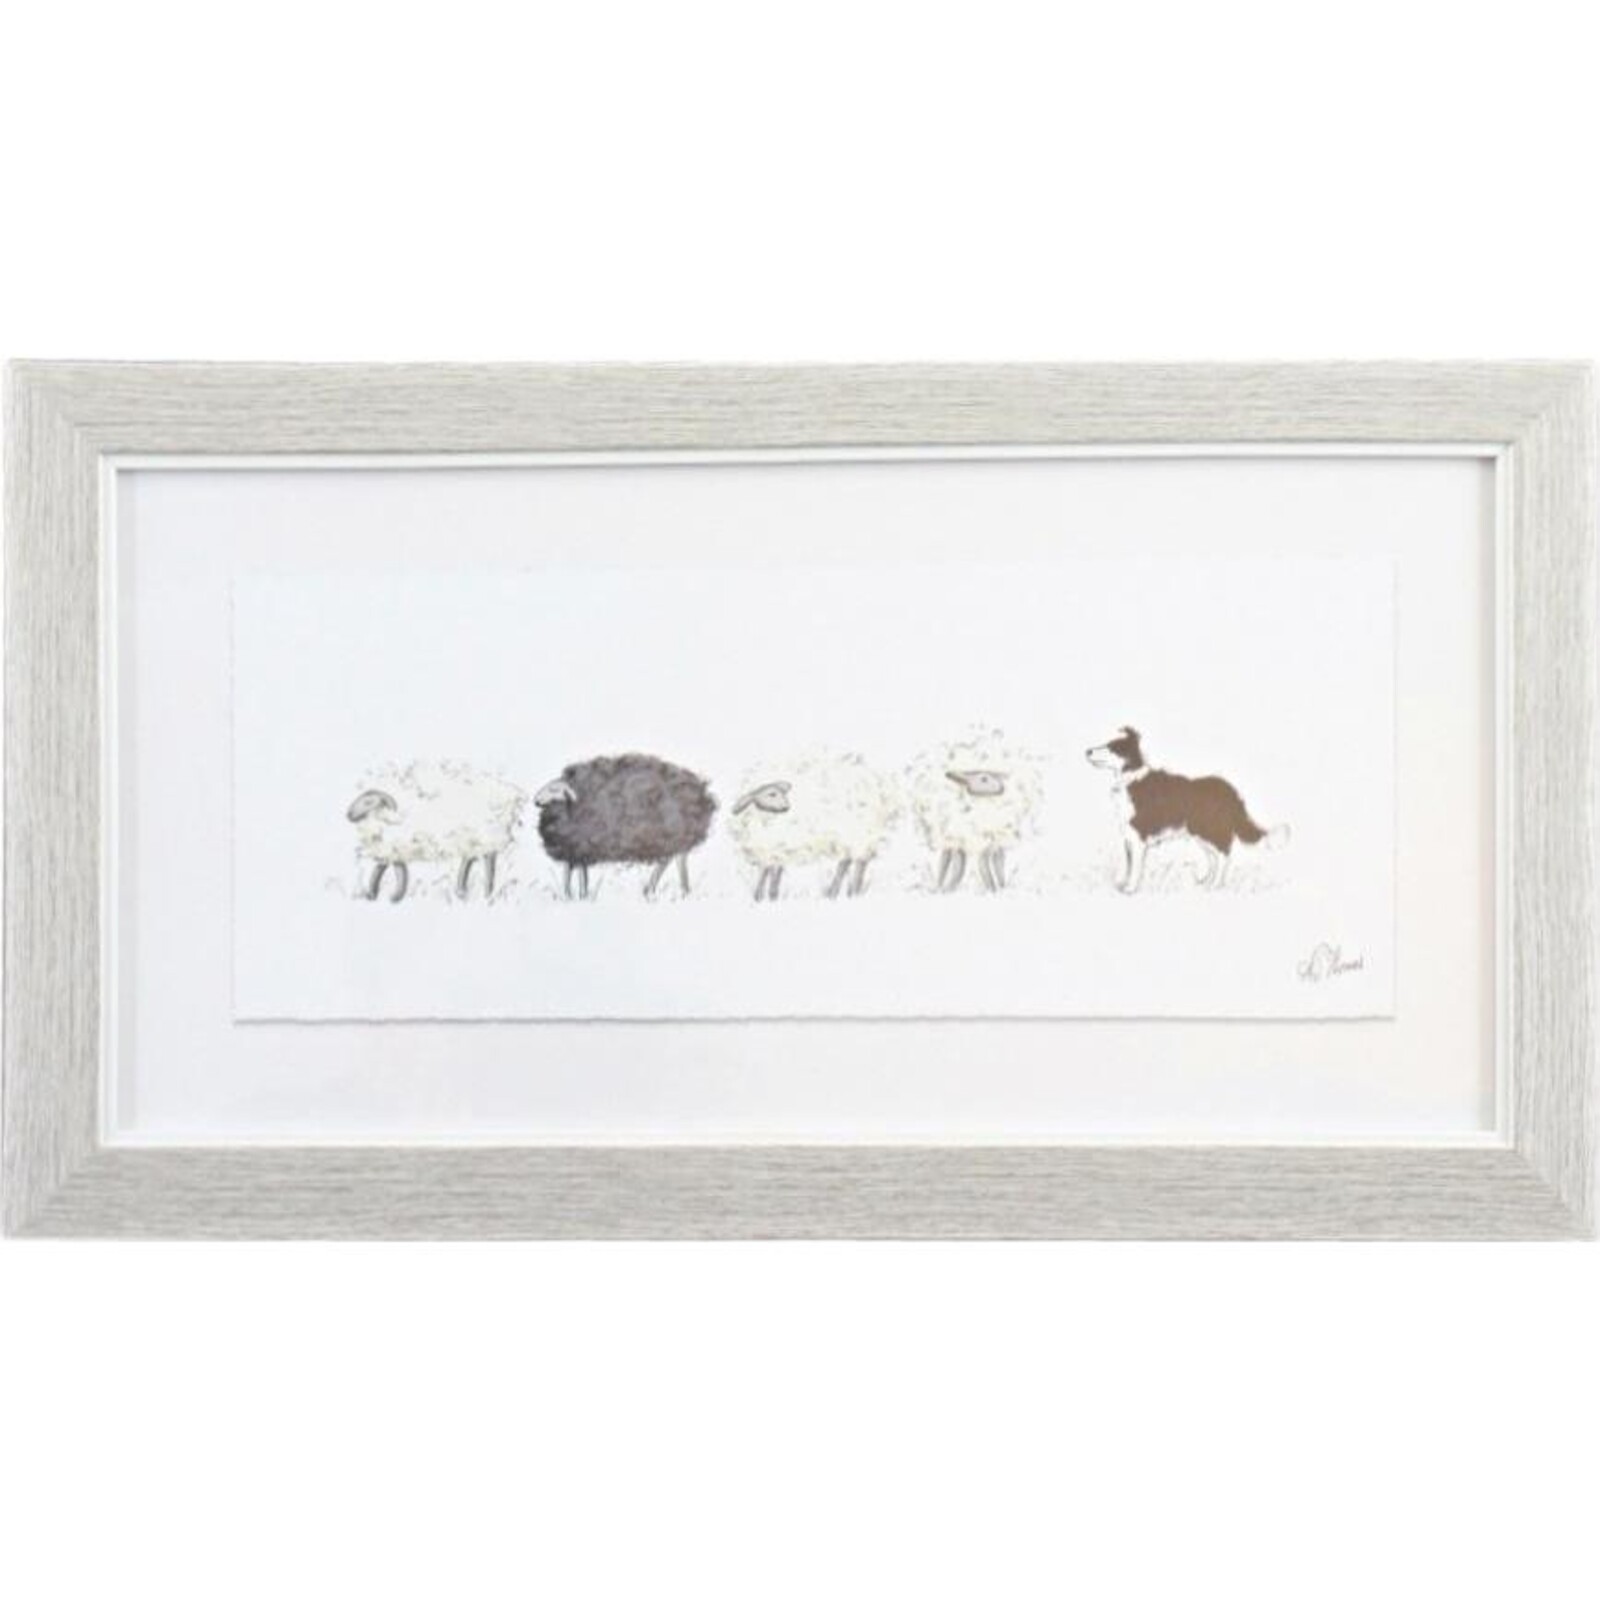 Framed Counting Sheep